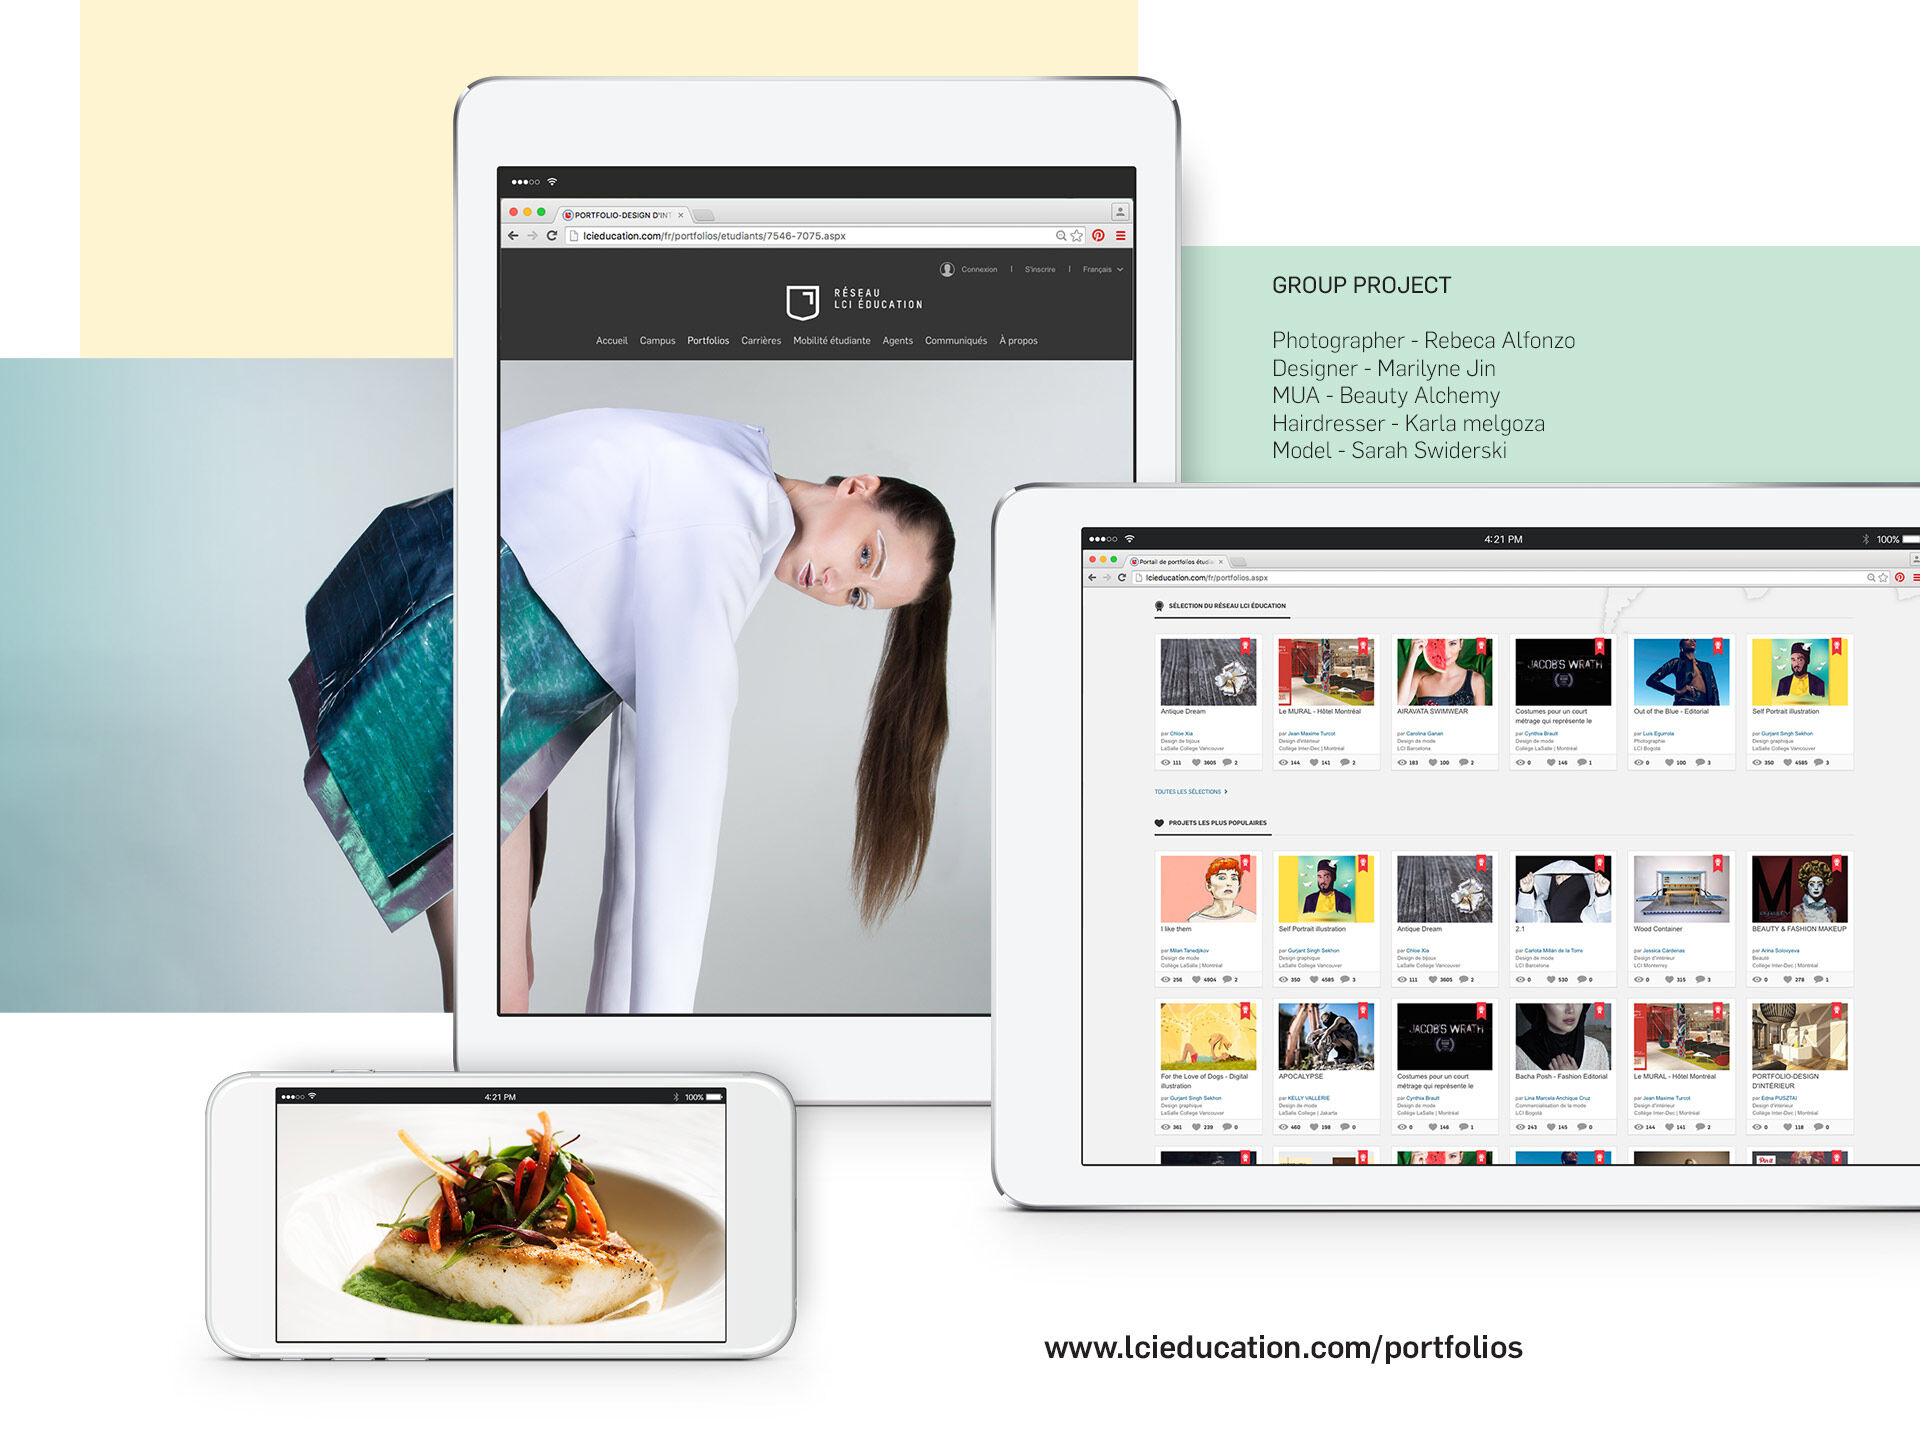 A creative showcase on various screens, displaying a fashion model and a culinary dish, highlighting a portfolio website for design professionals.